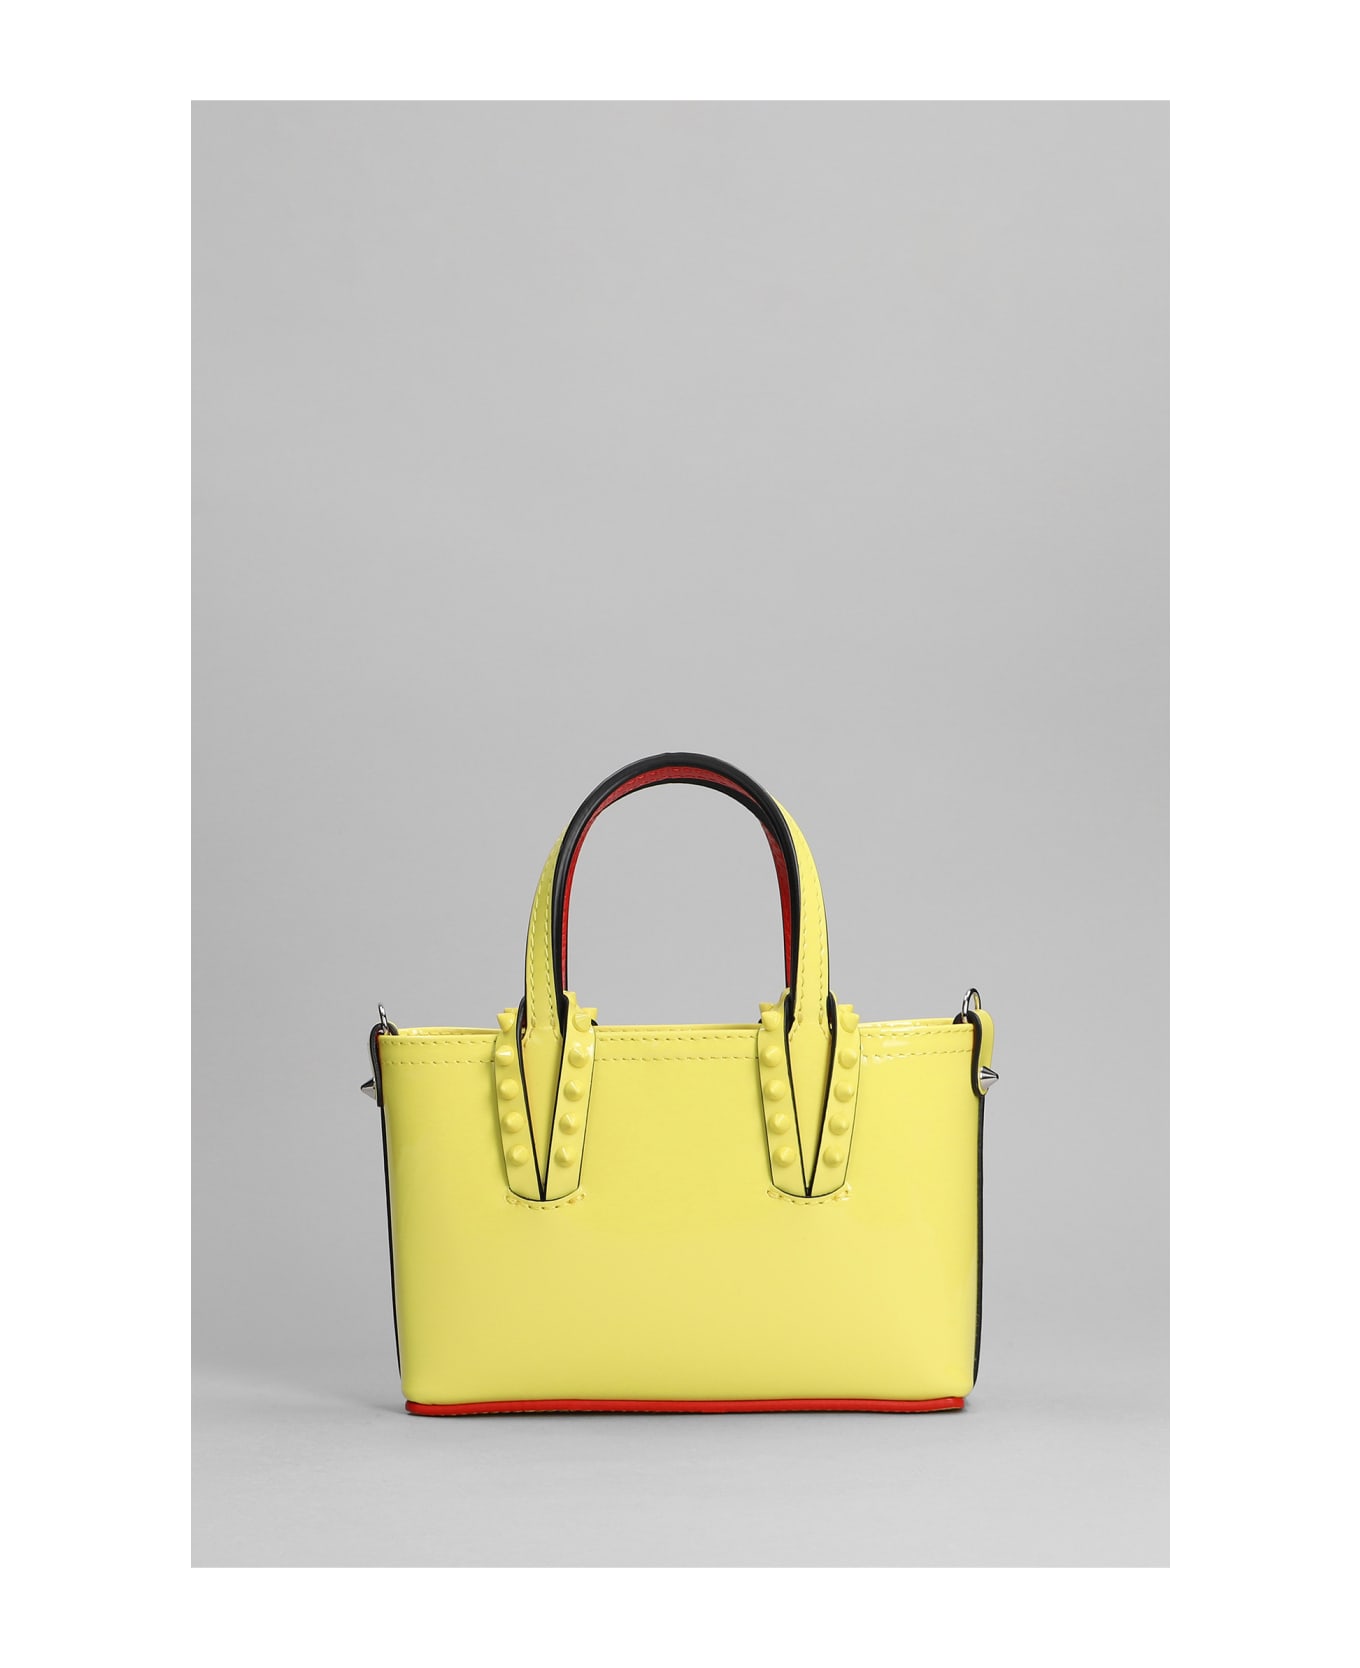 Christian Louboutin Cabata Hand Bag In Yellow Patent Leather - yellow